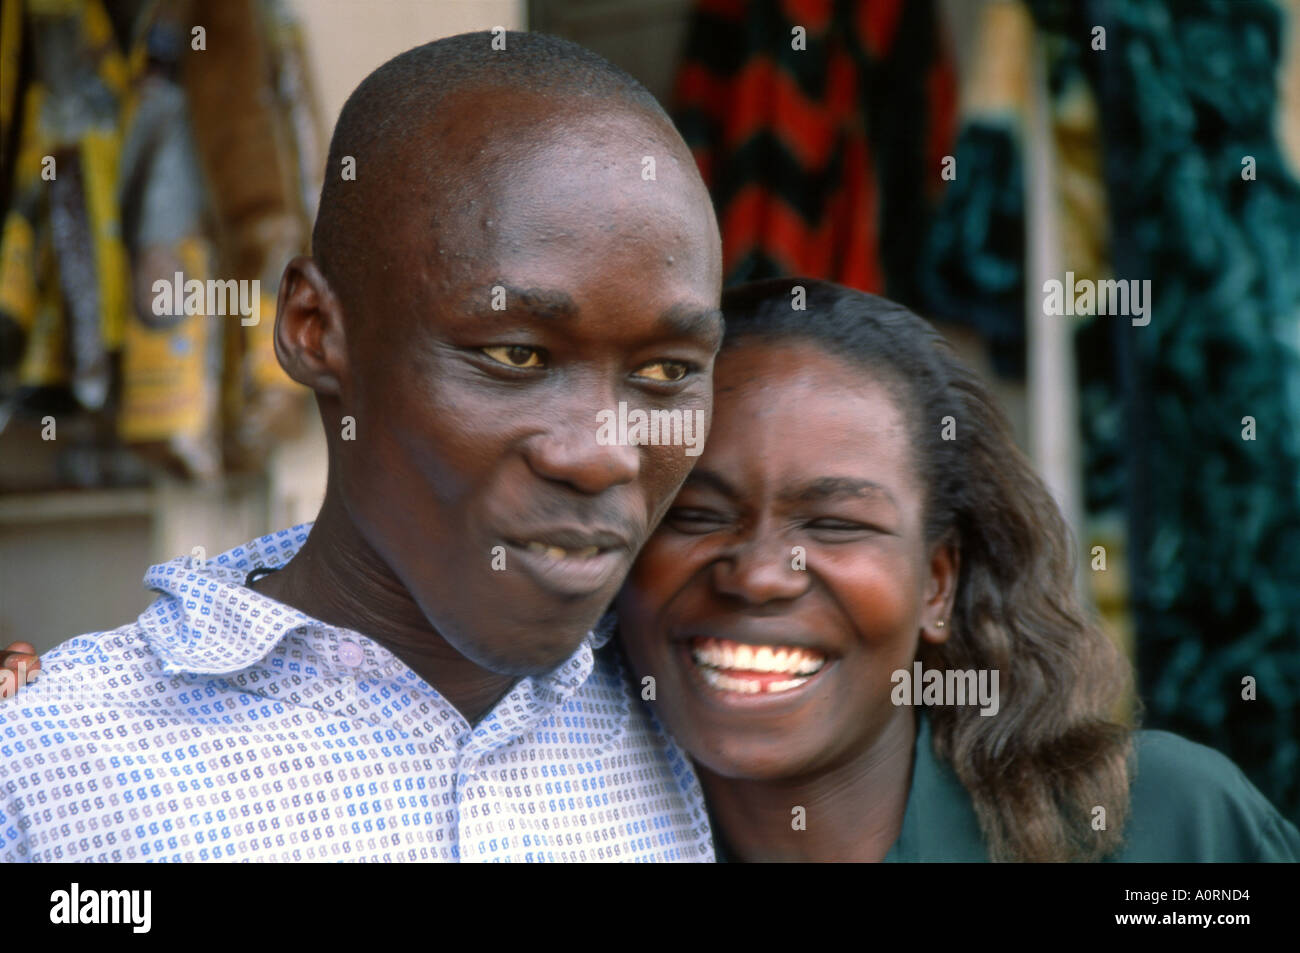 Portrait of smiling young black African man & woman posing together in outdoor location - Jinja City Uganda East Africa Stock Photo